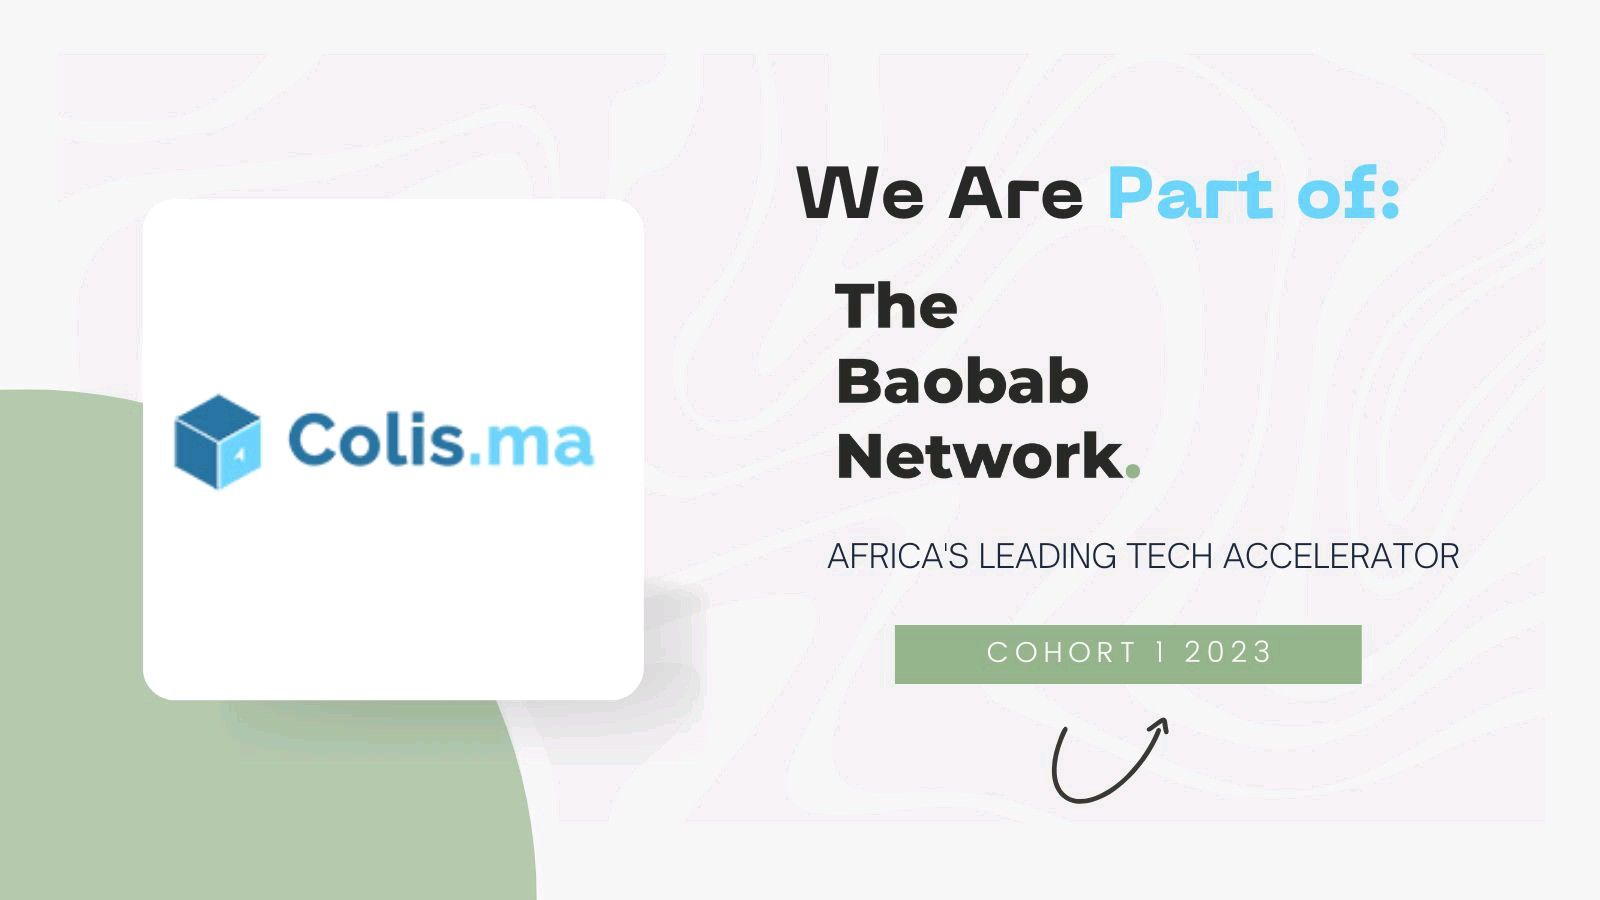 Moroccan Logistics Startup Colis.ma Raises $50,000 From Kenya’s Accelerator The Baobab Network